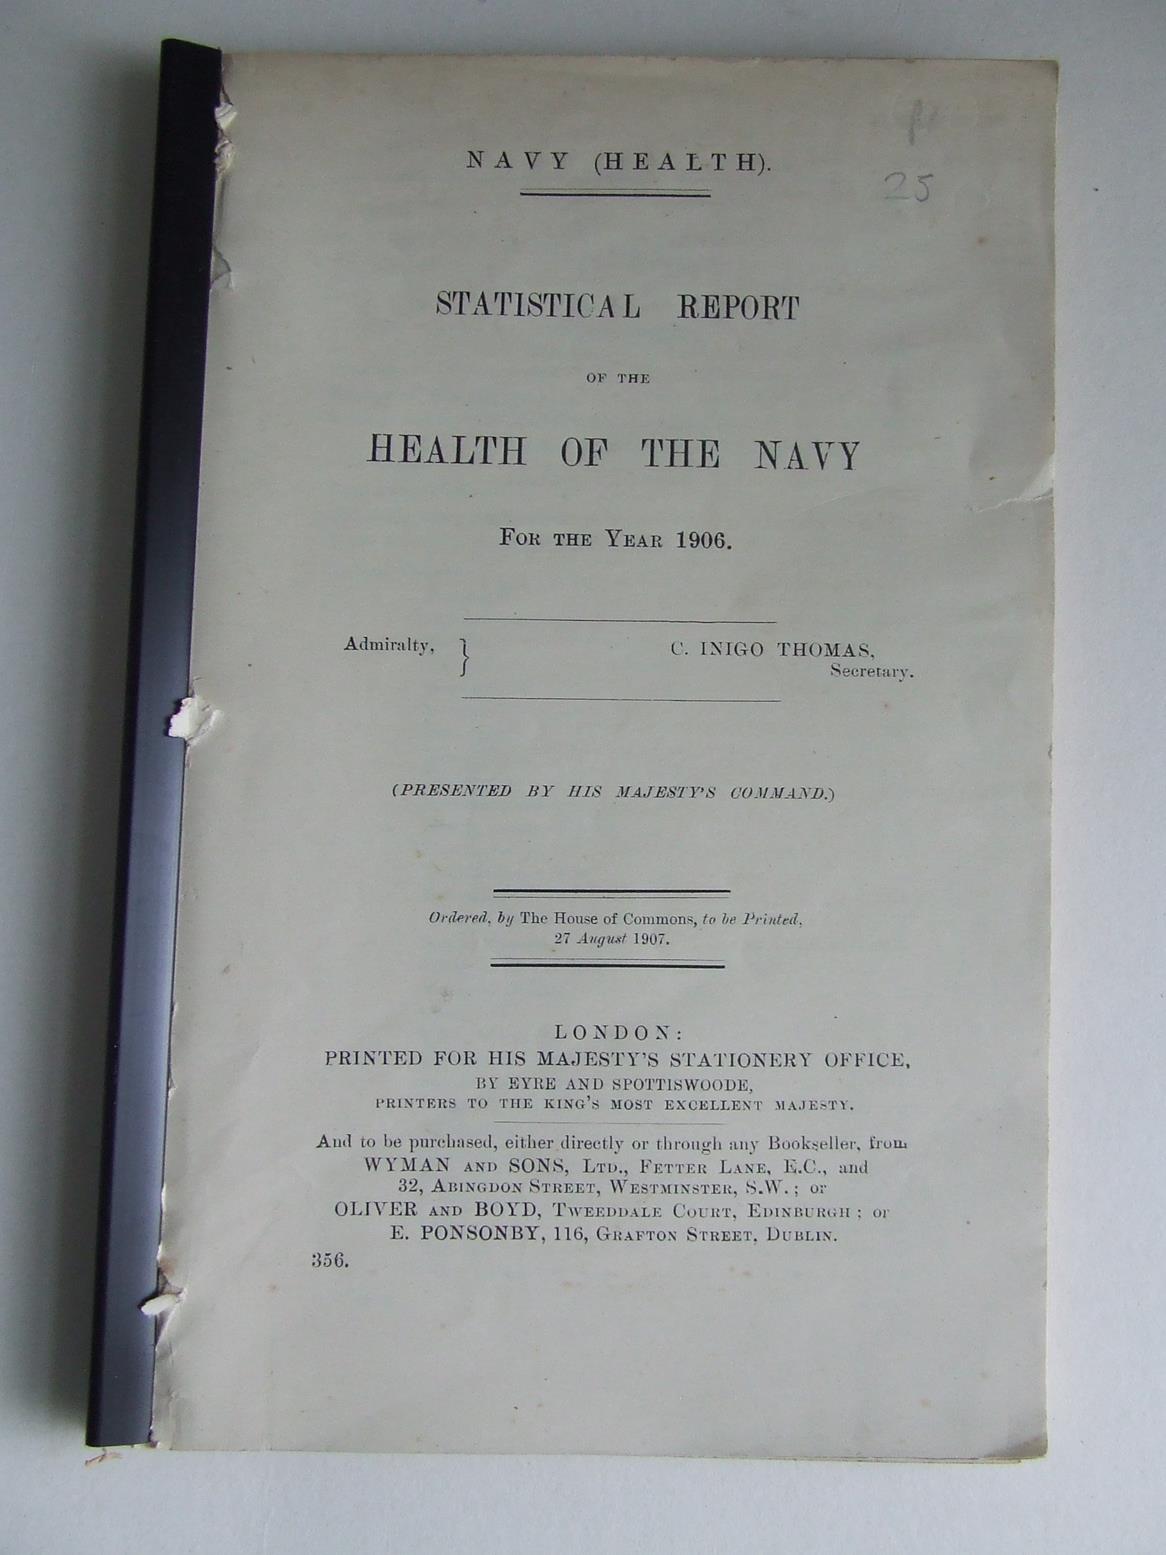 Statistical Report of the Health of the Navy for the year 1906